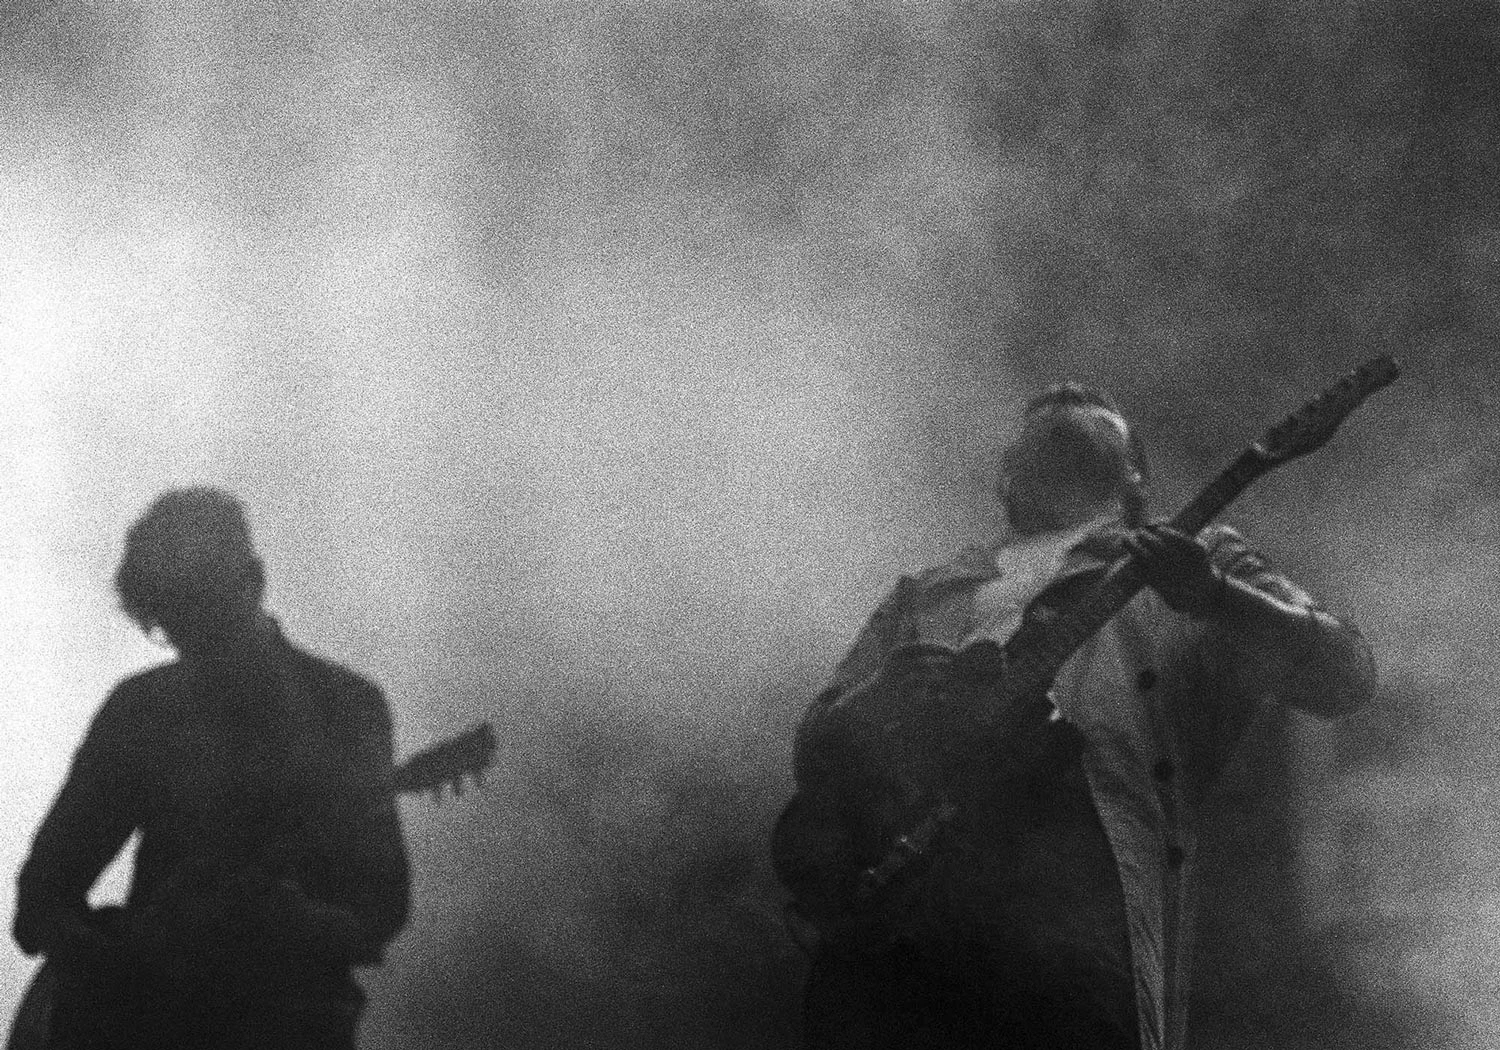 Band's guitarist shows passion inside the fog or smoke